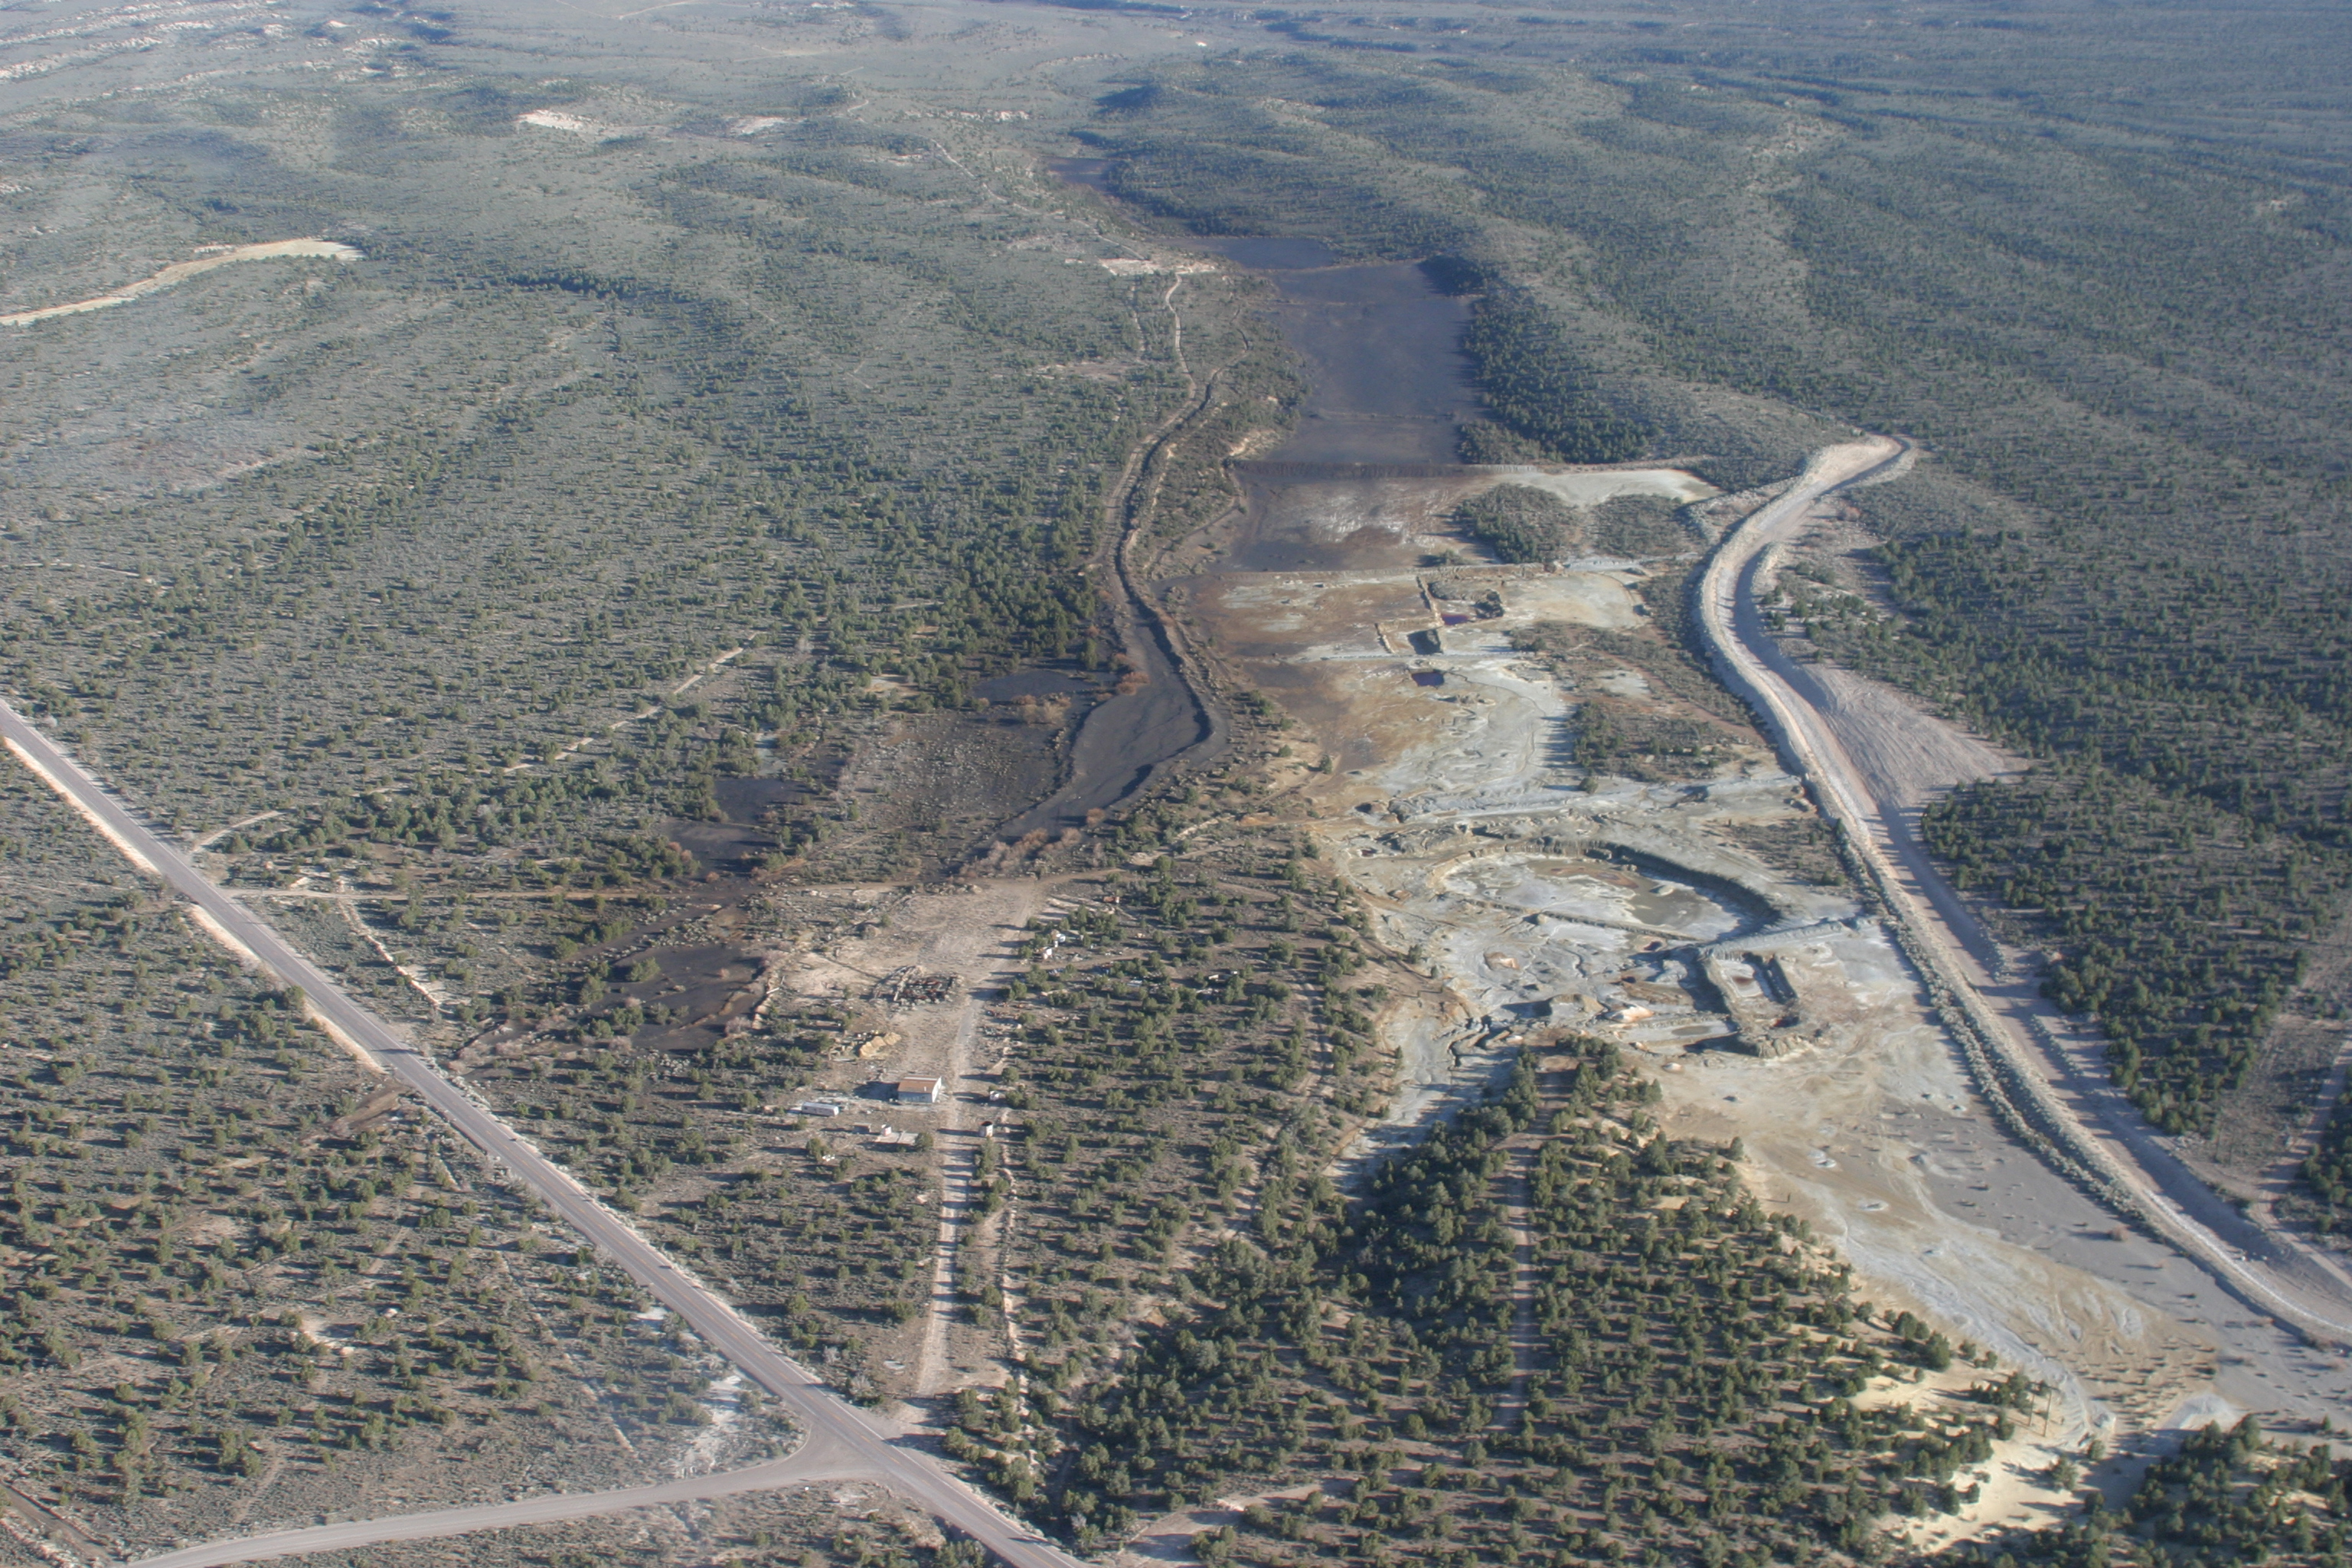 Aerial Photo of Caselton Wash Tailings, part of Operable Unit 5 (OU5) managed by the BLM near Pioche, Lincoln County, Nevada.